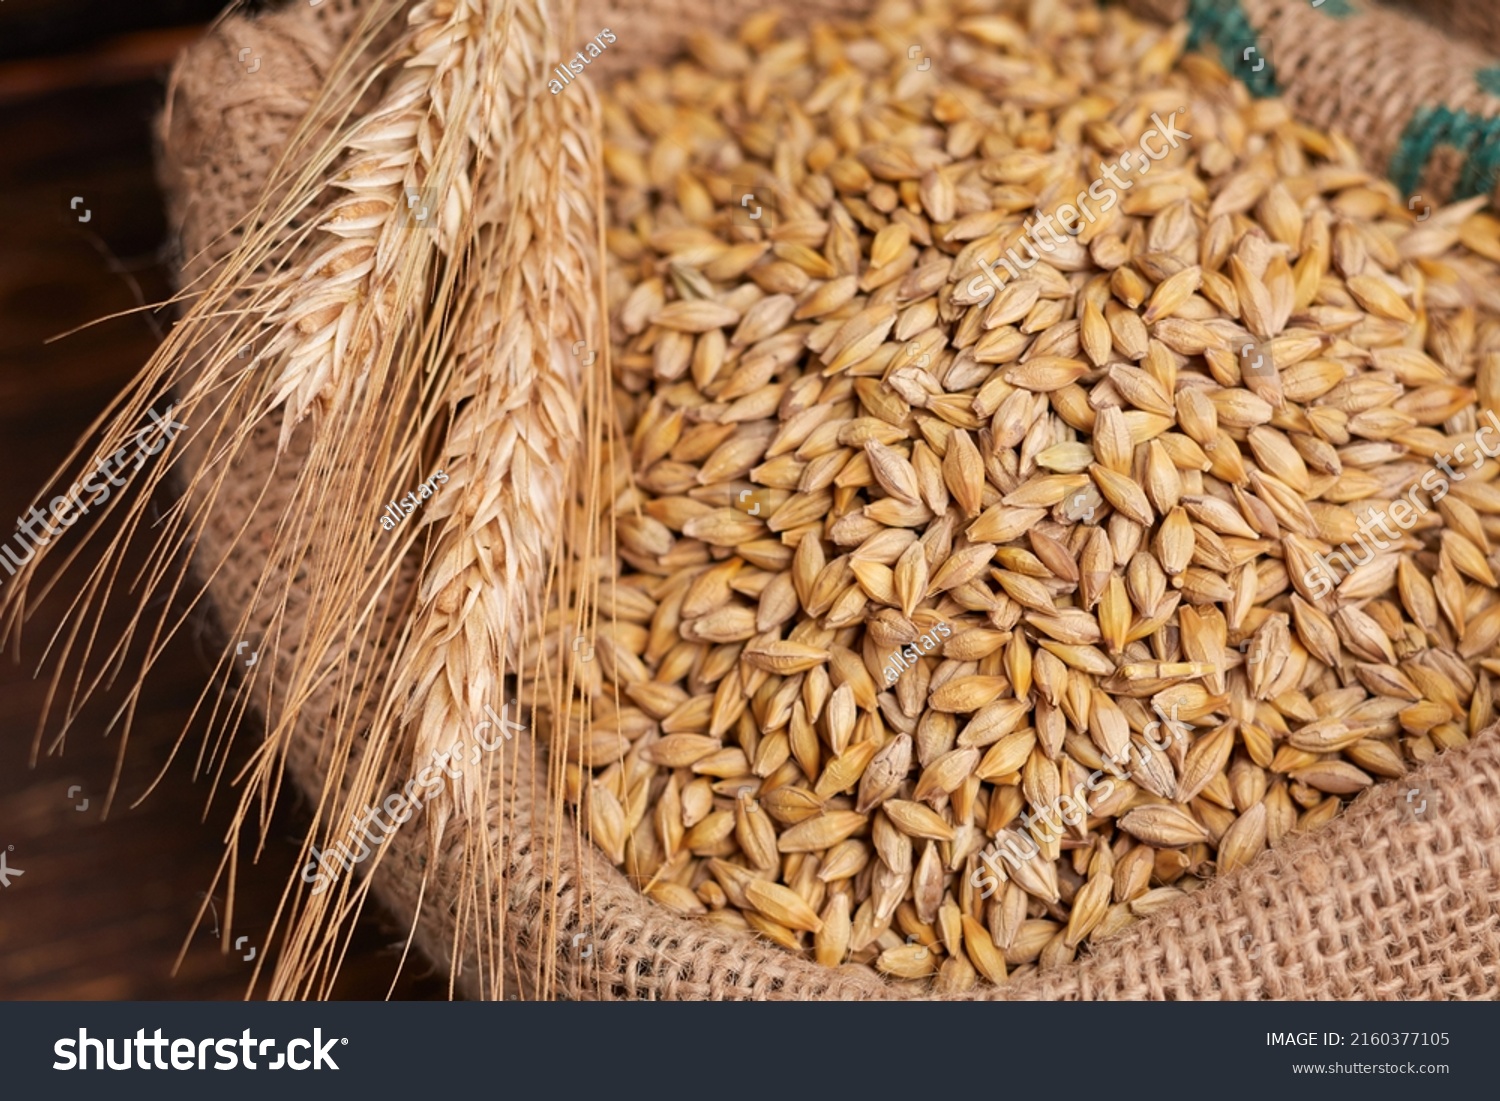 barley grain on the wooden background #2160377105